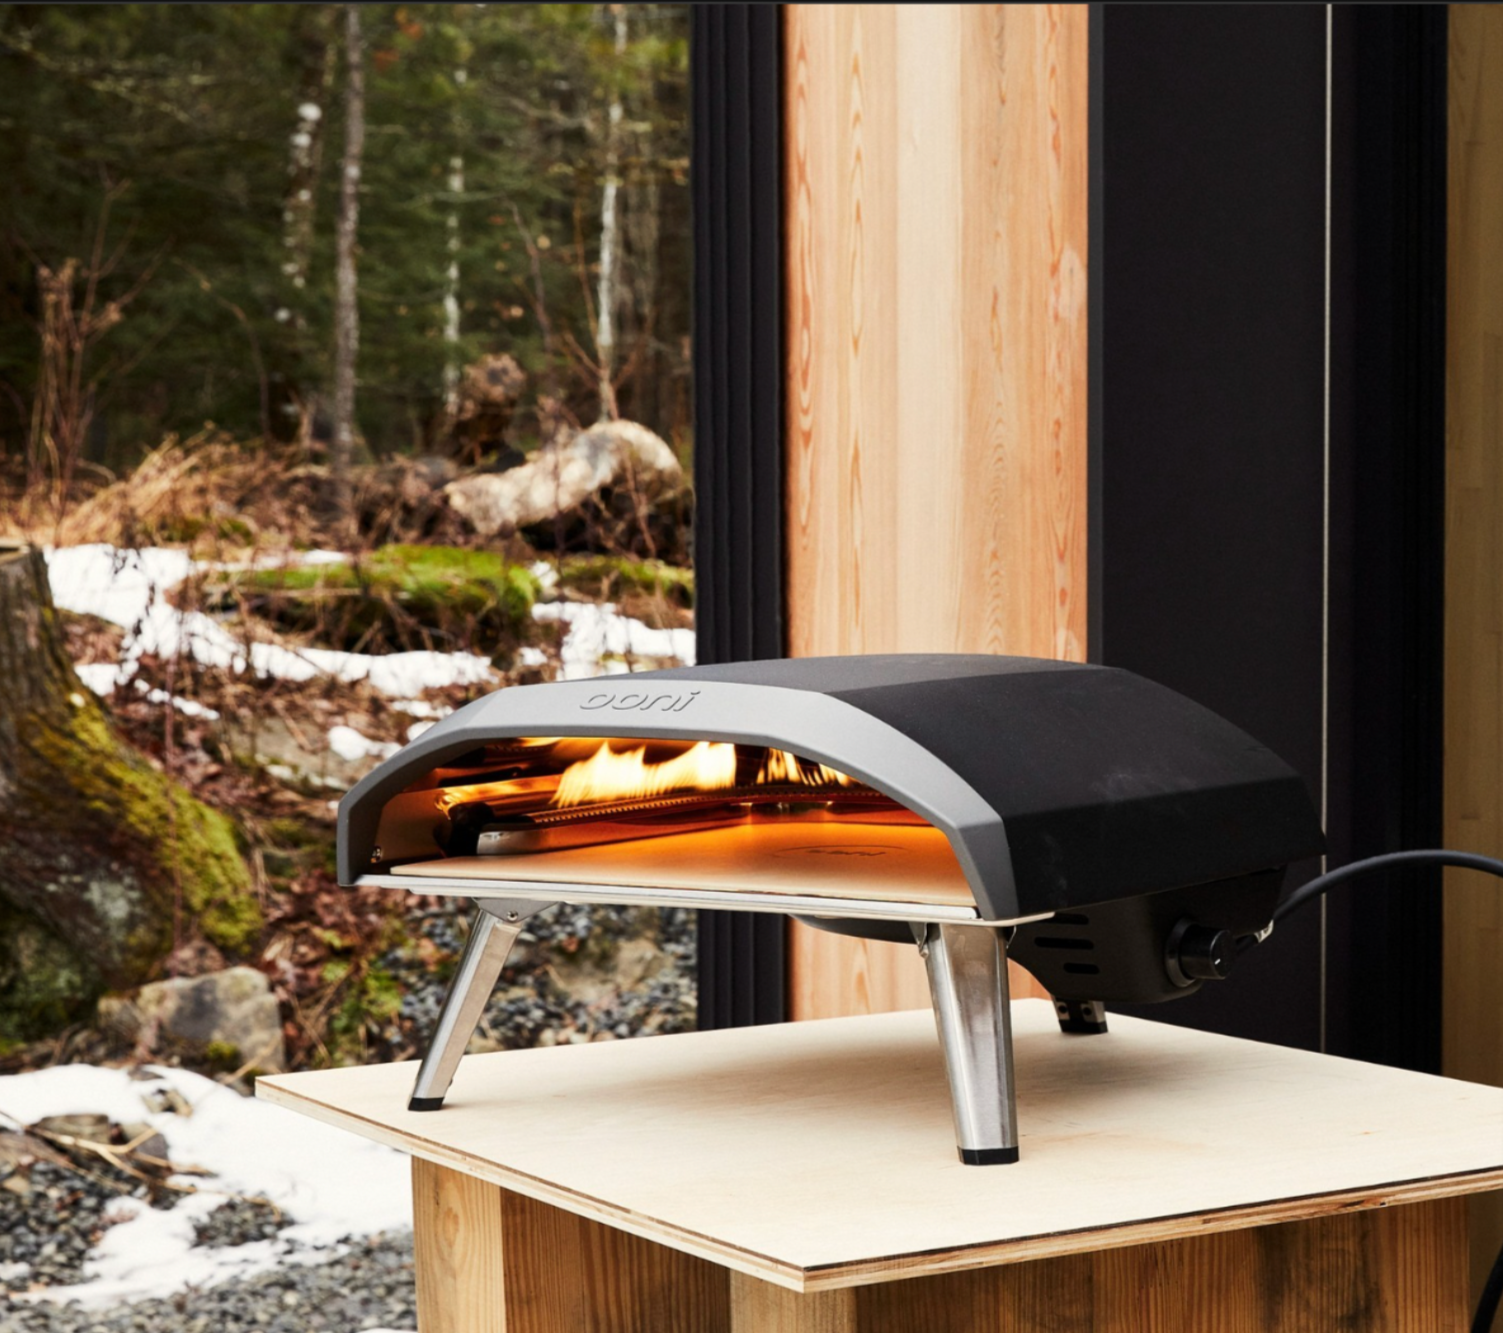 An Ooni pizza oven heating its interiors